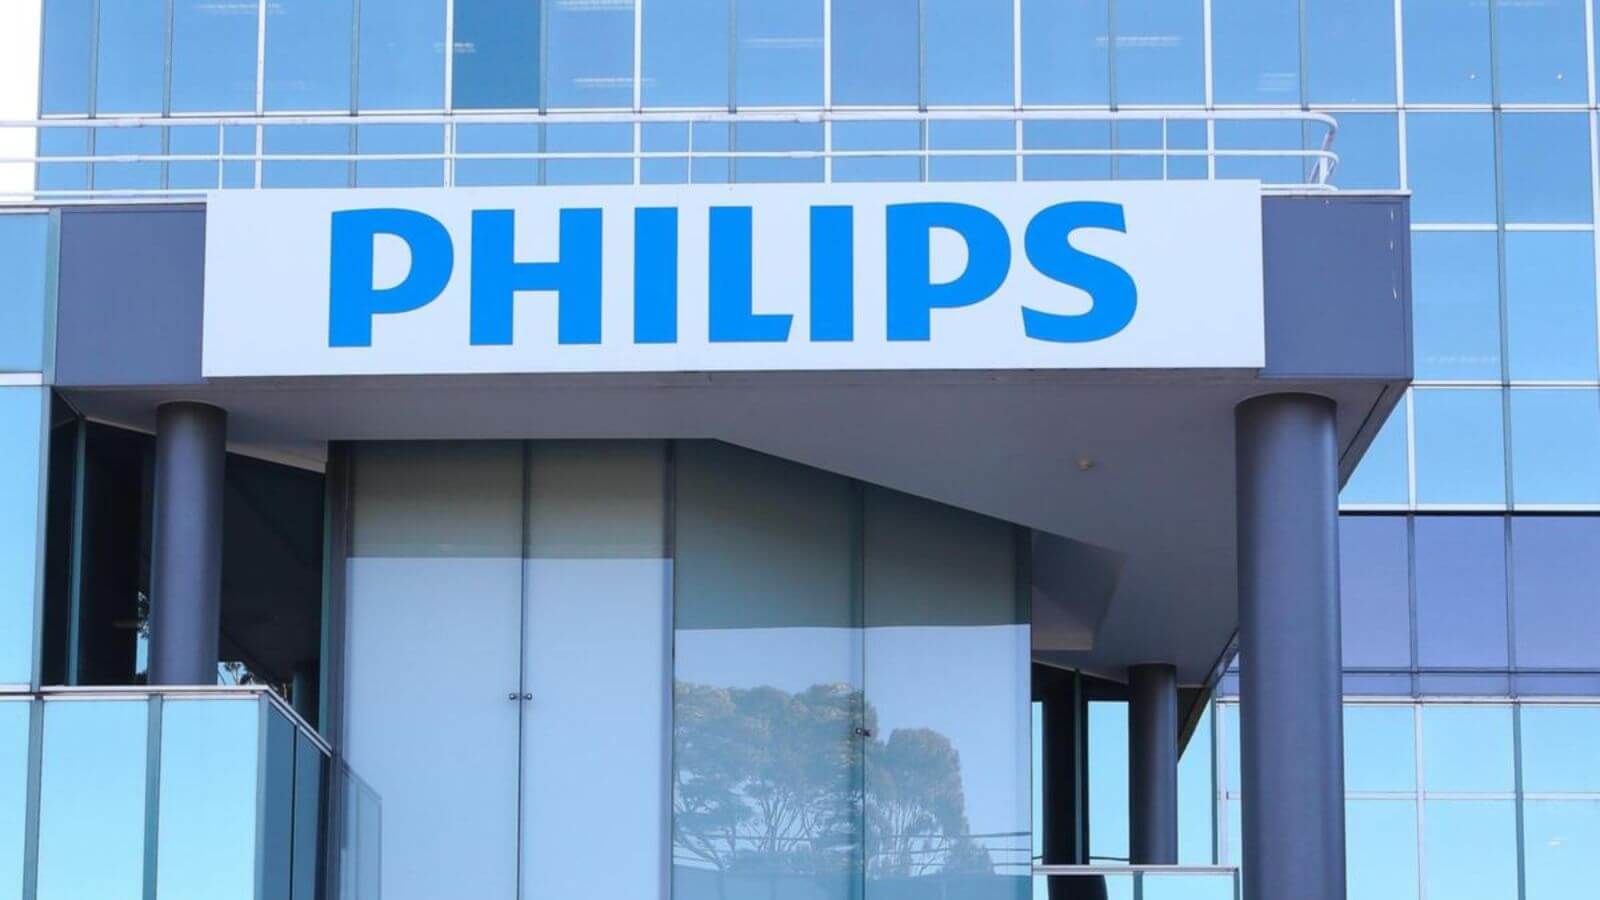 Philips Off Campus Drive 2022